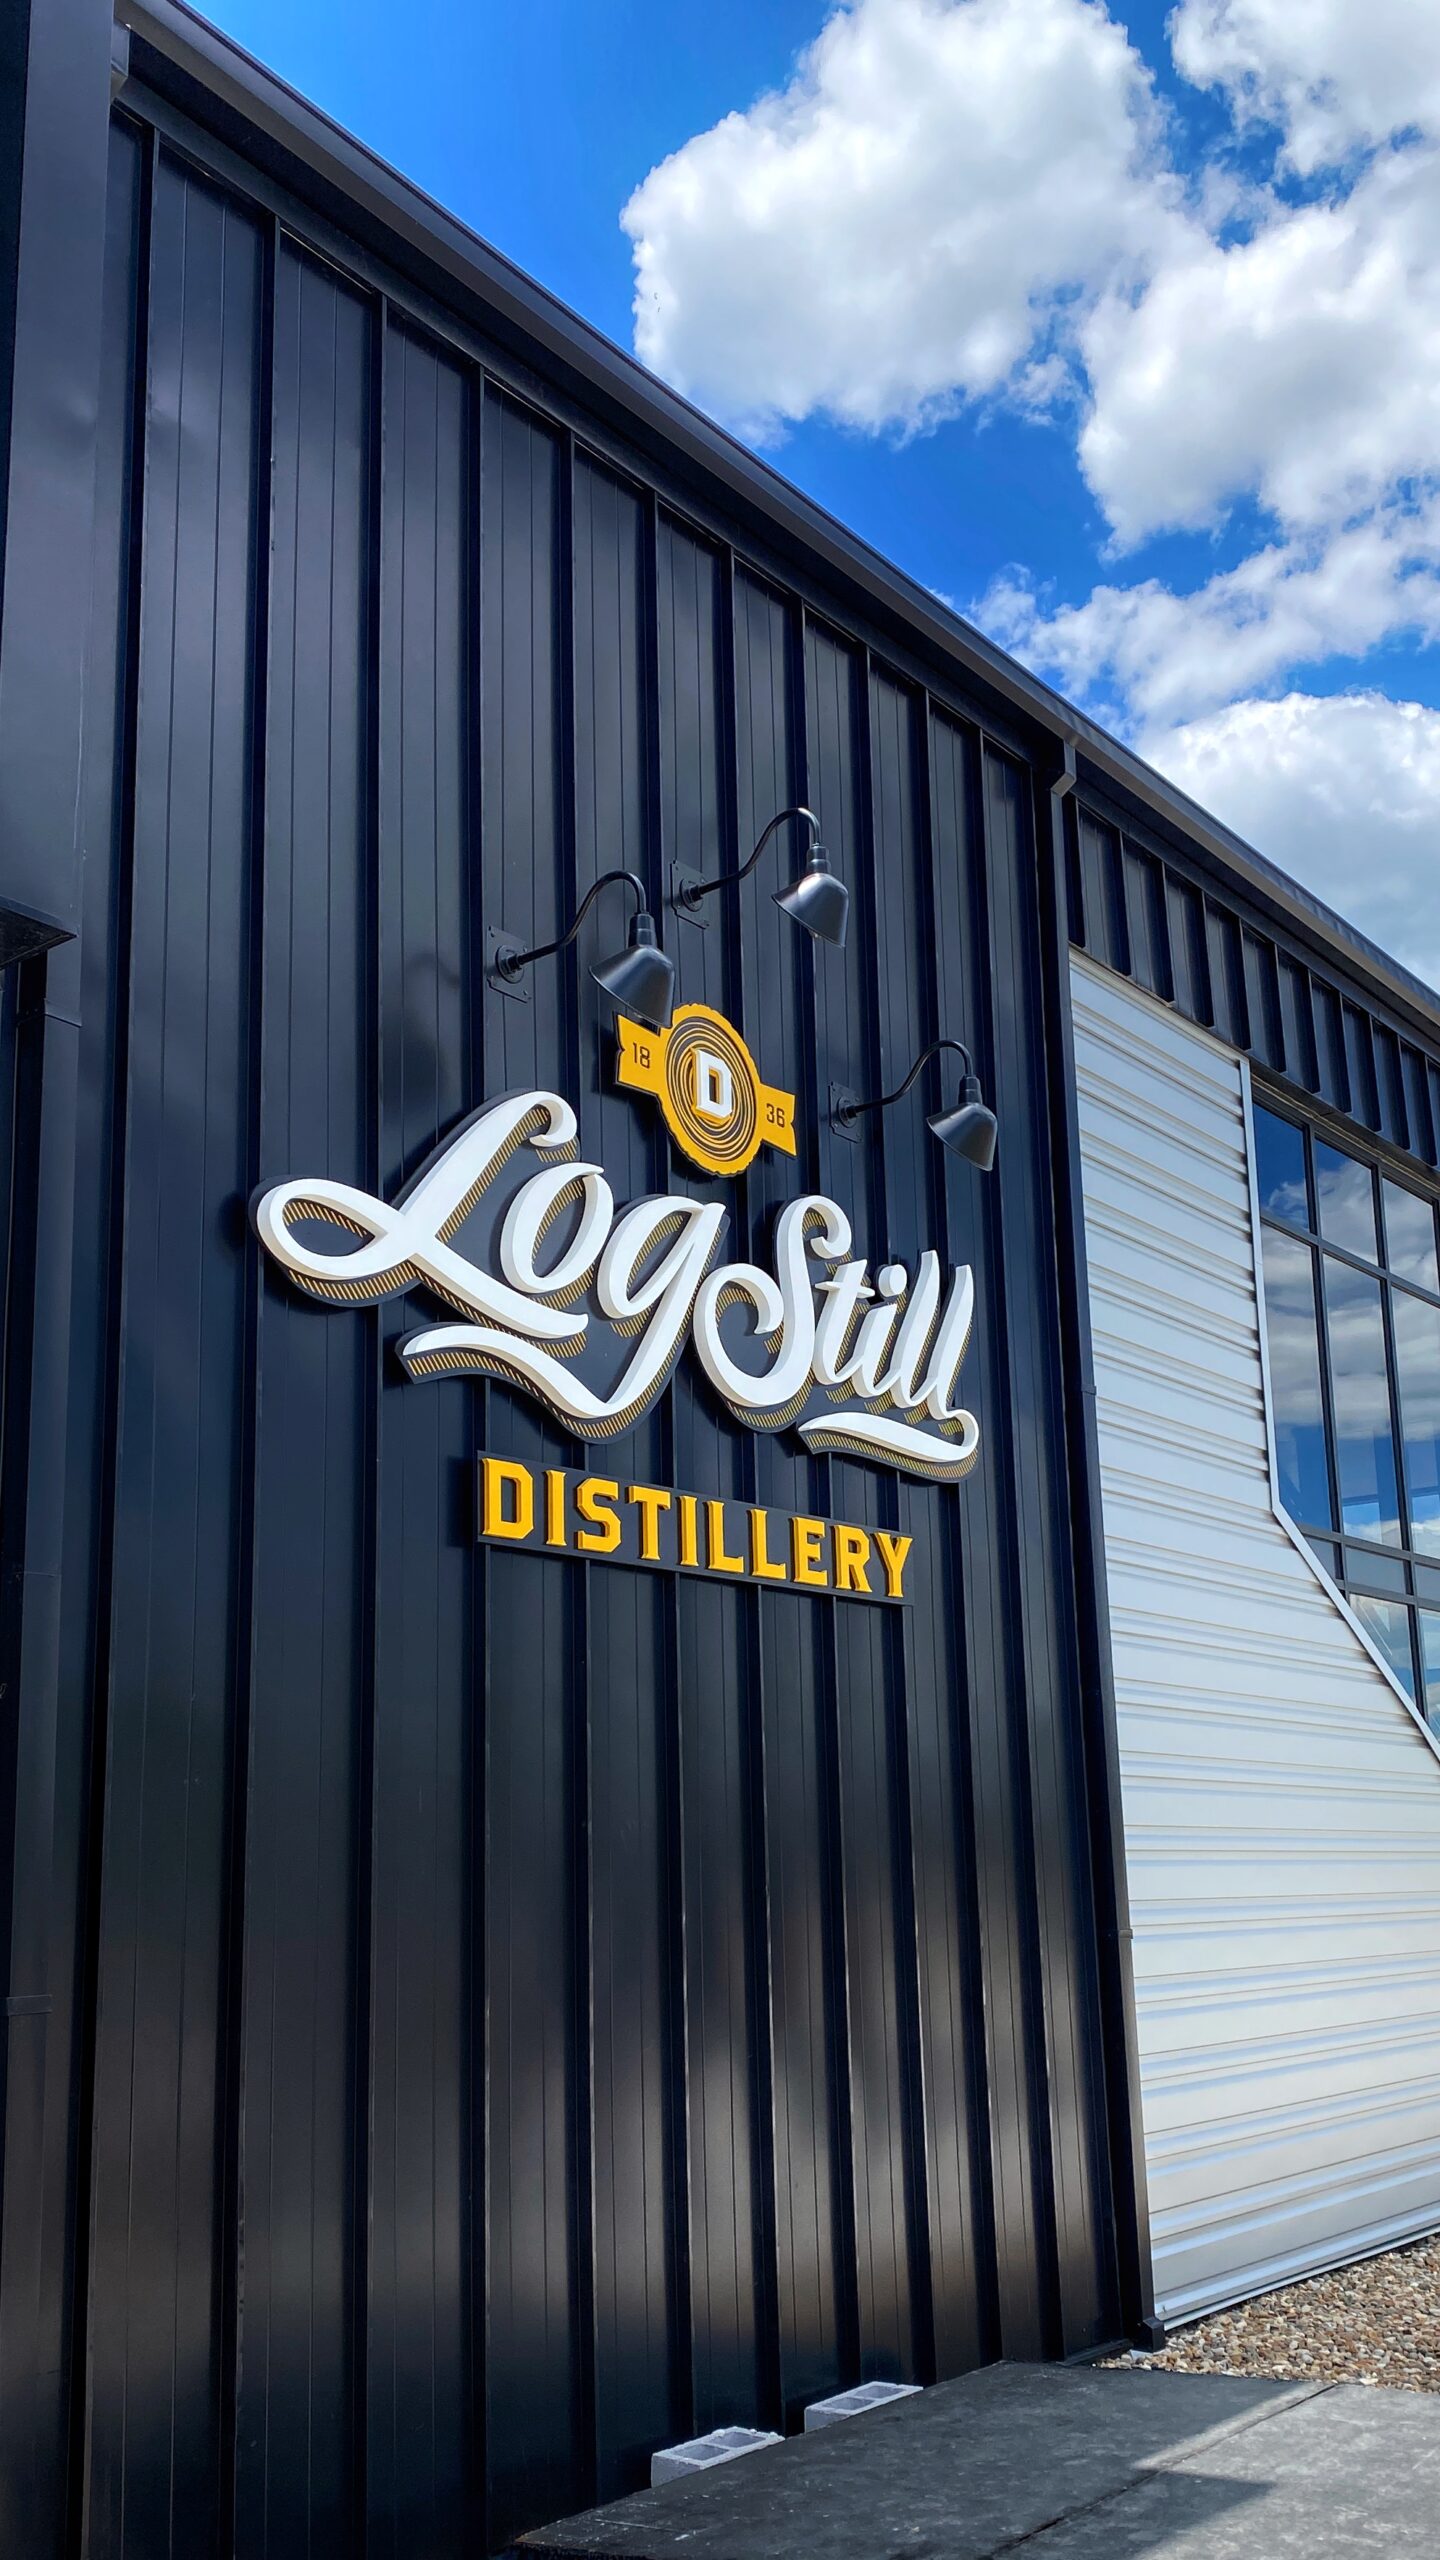 124: Reviving the Dant Family Name in Bourbon History – Log Still Opens Kentucky’s Newest Distillery